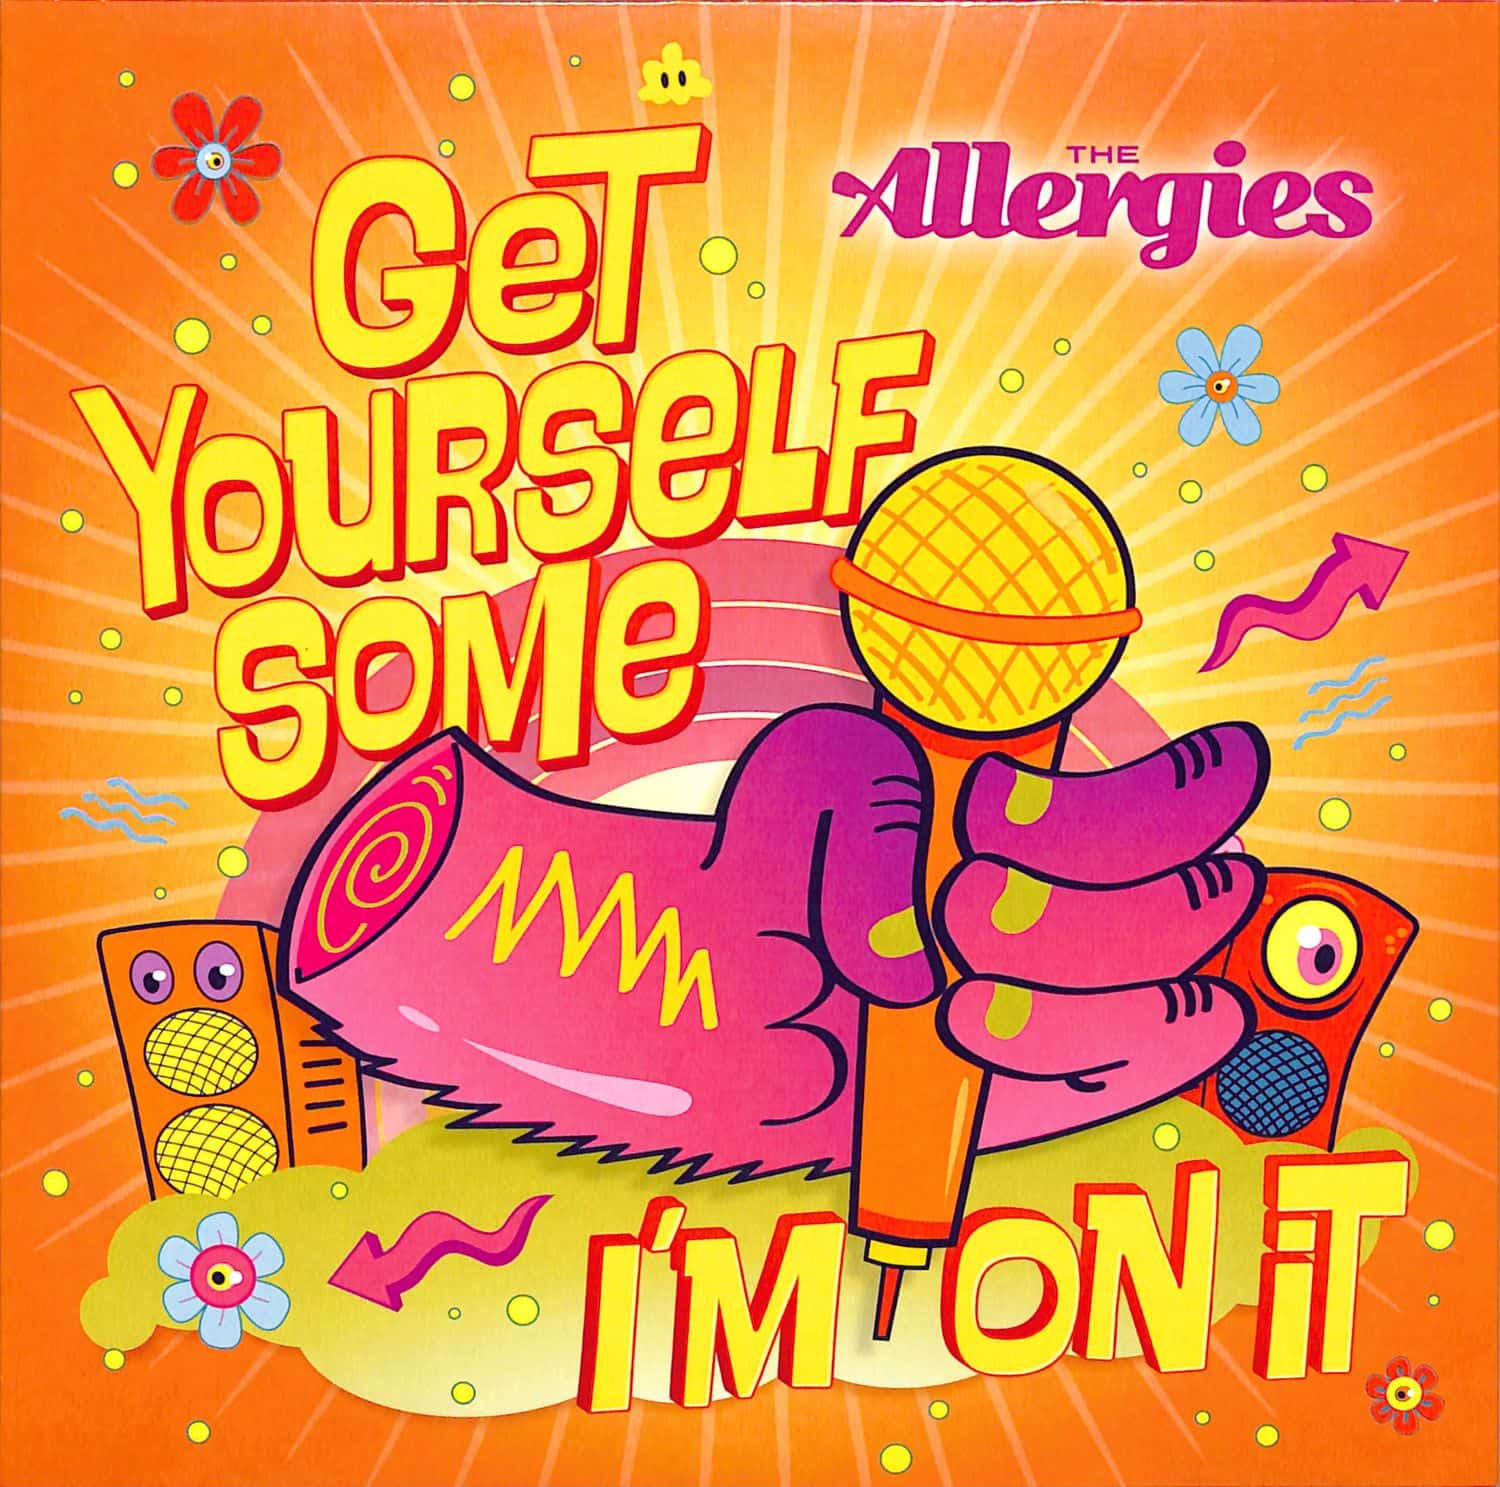 The Allergies - GET YOURSELF SOME / I M ON IT 